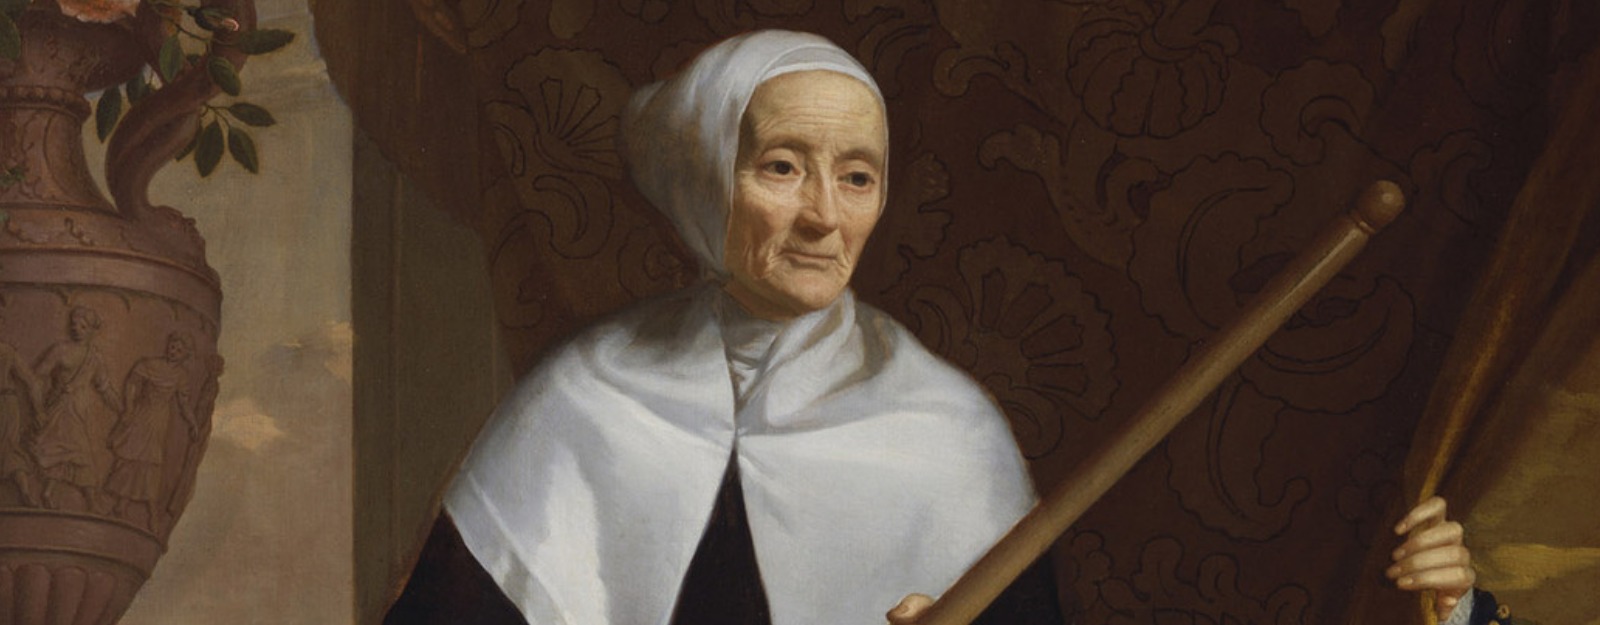 face of old woman from John Riley's painting